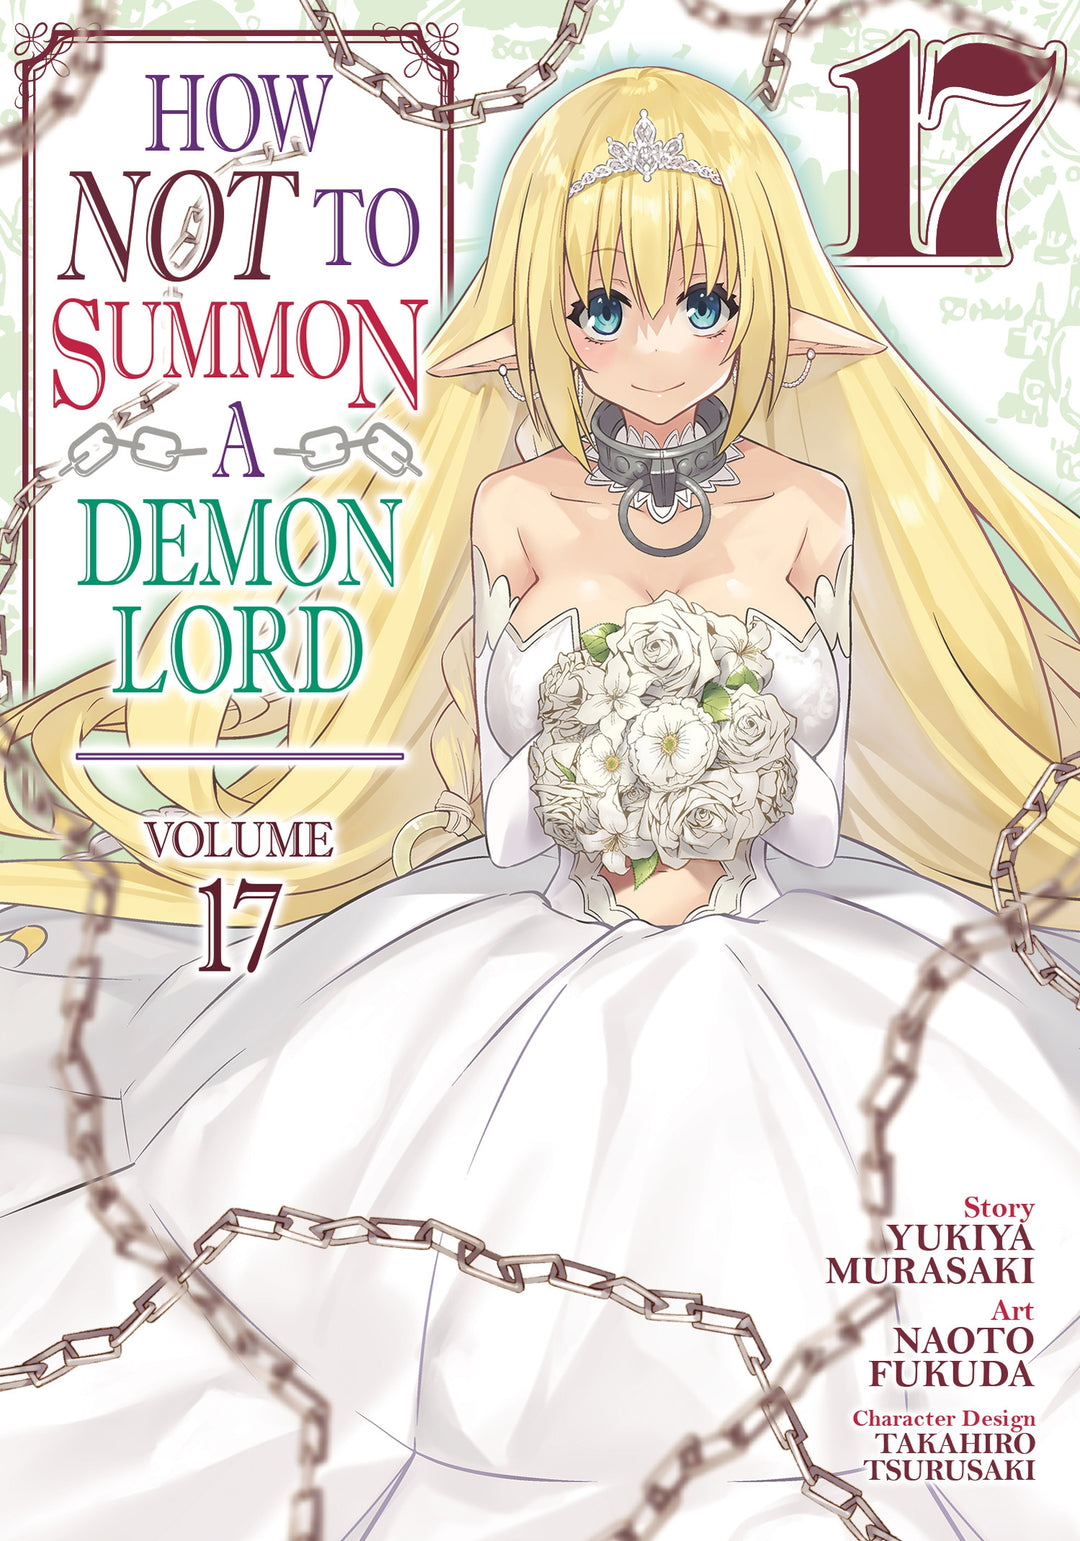 How NOT to Summon a Demon Lord (Manga), Vol. 17